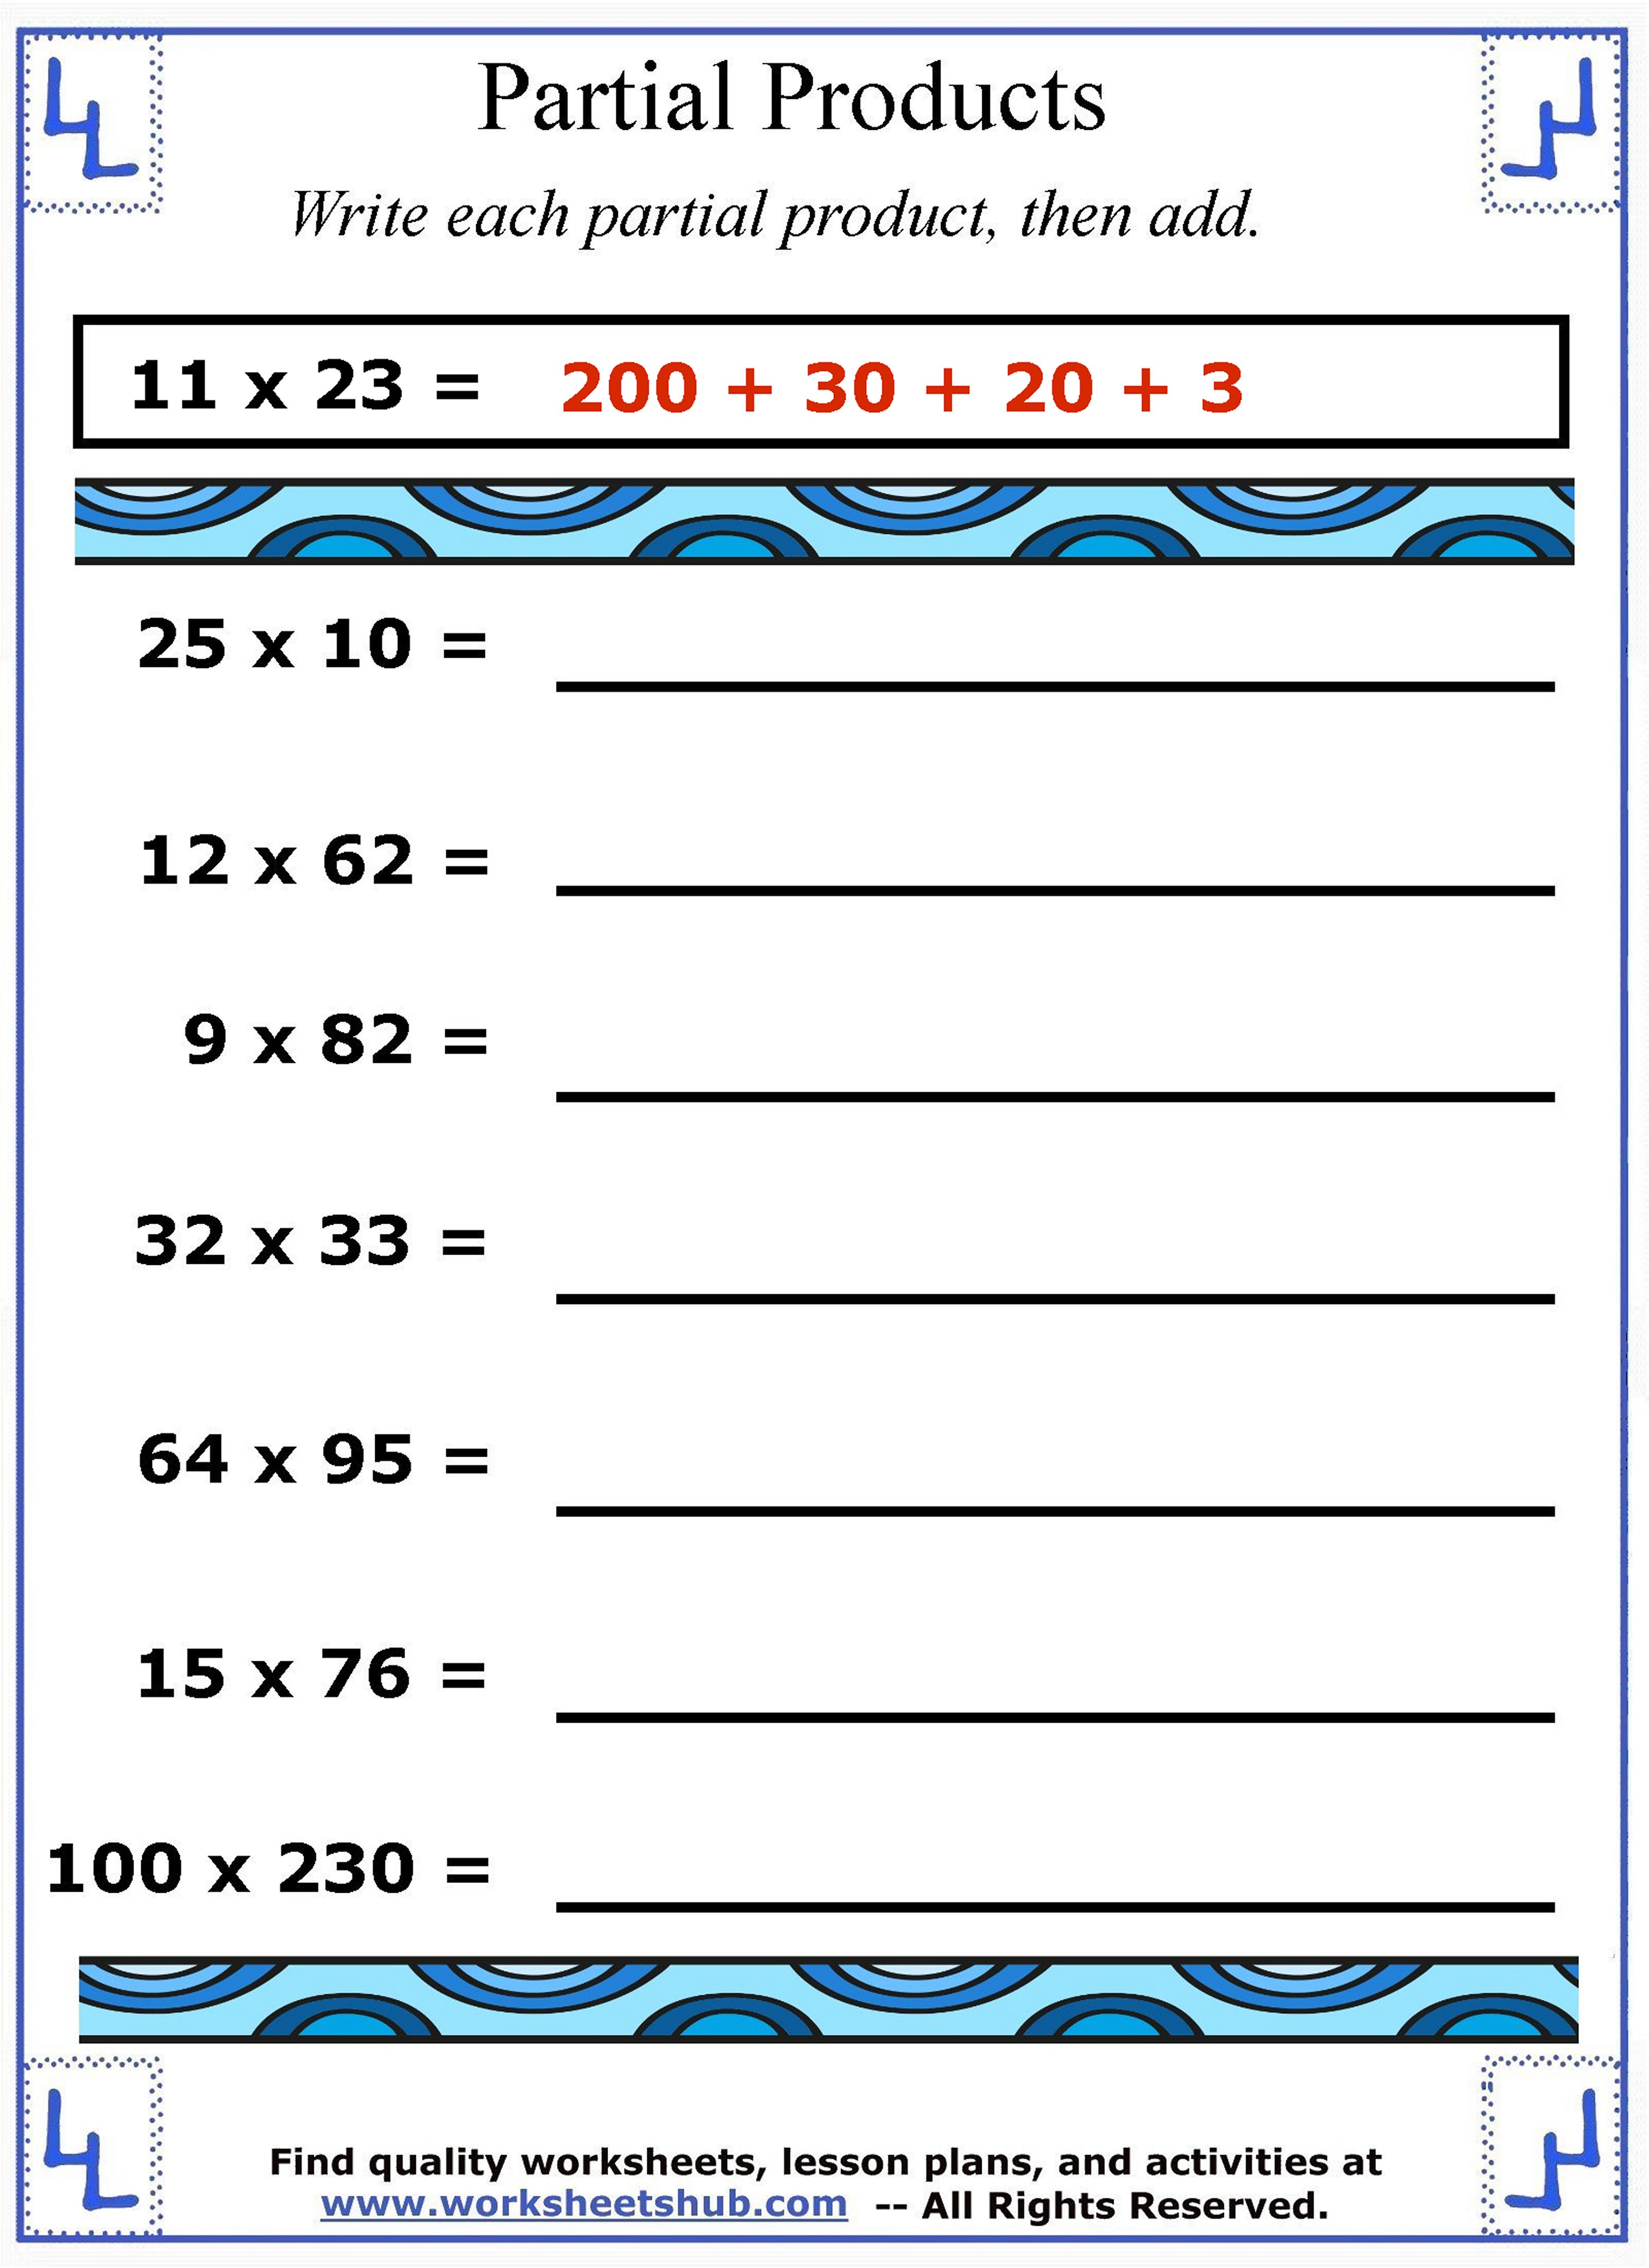  Partial Product Multiplication Worksheet